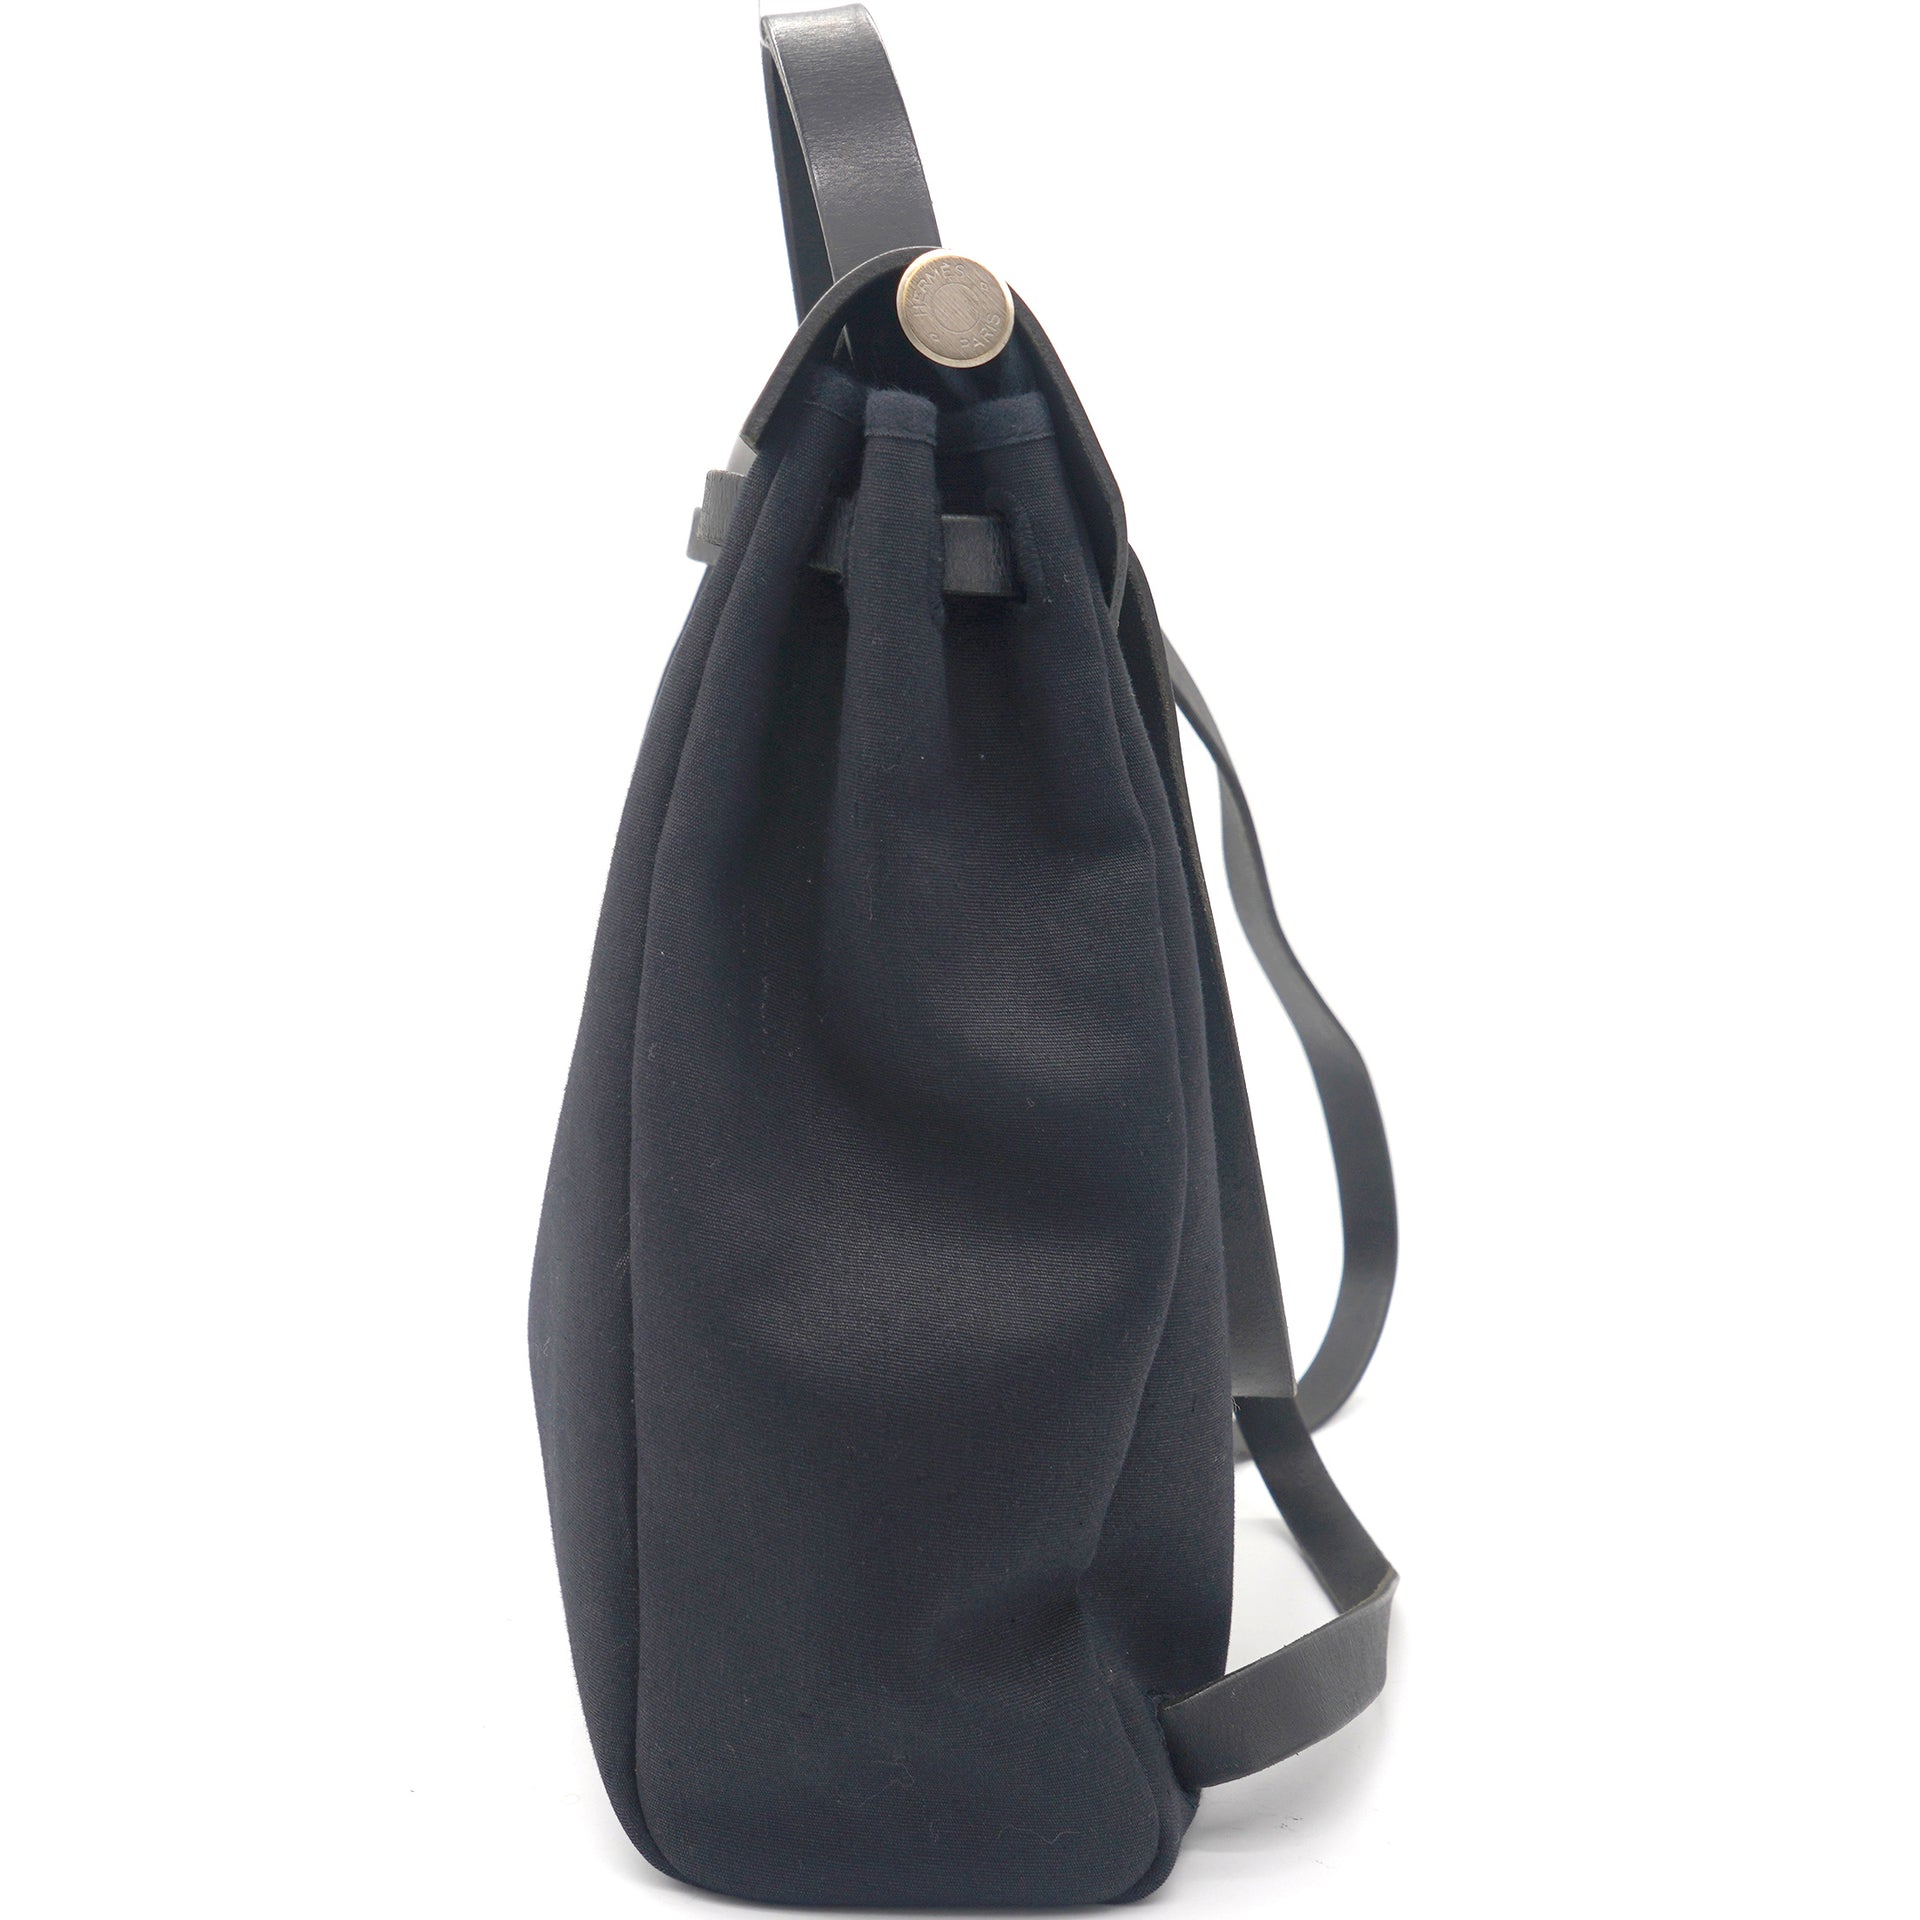 Black Canvas and Leather 2-in-1 Herbag PM Backpack